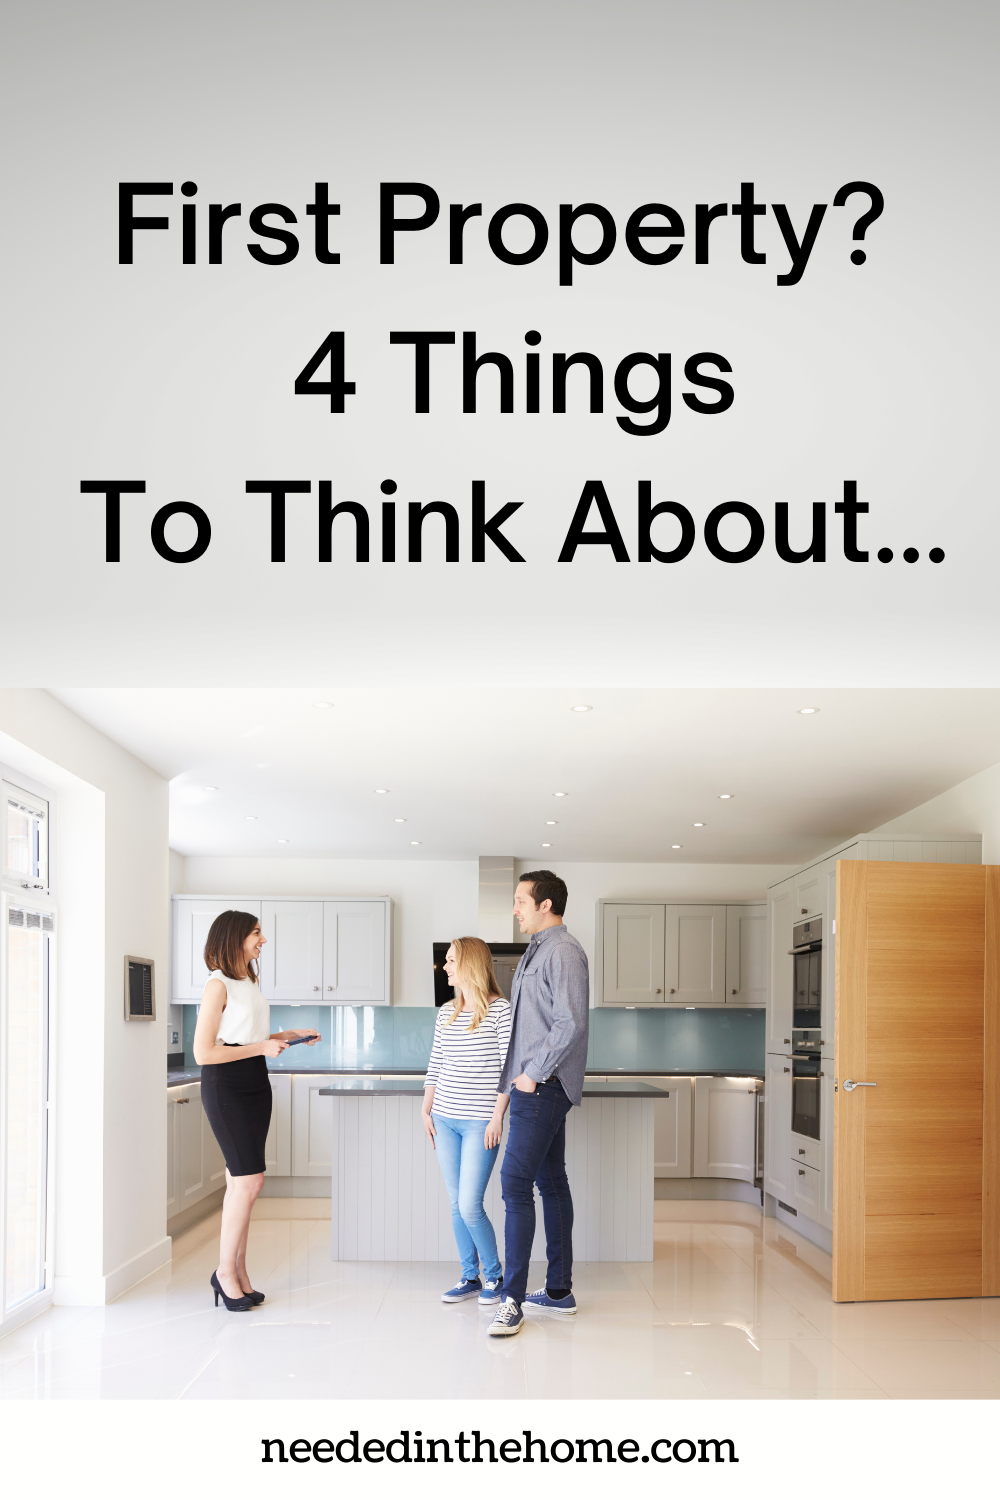 pinterest-pin-description First Property? 4 Things To Think About... realtor showing a couple the kitchen of a home for sale neededinthehome